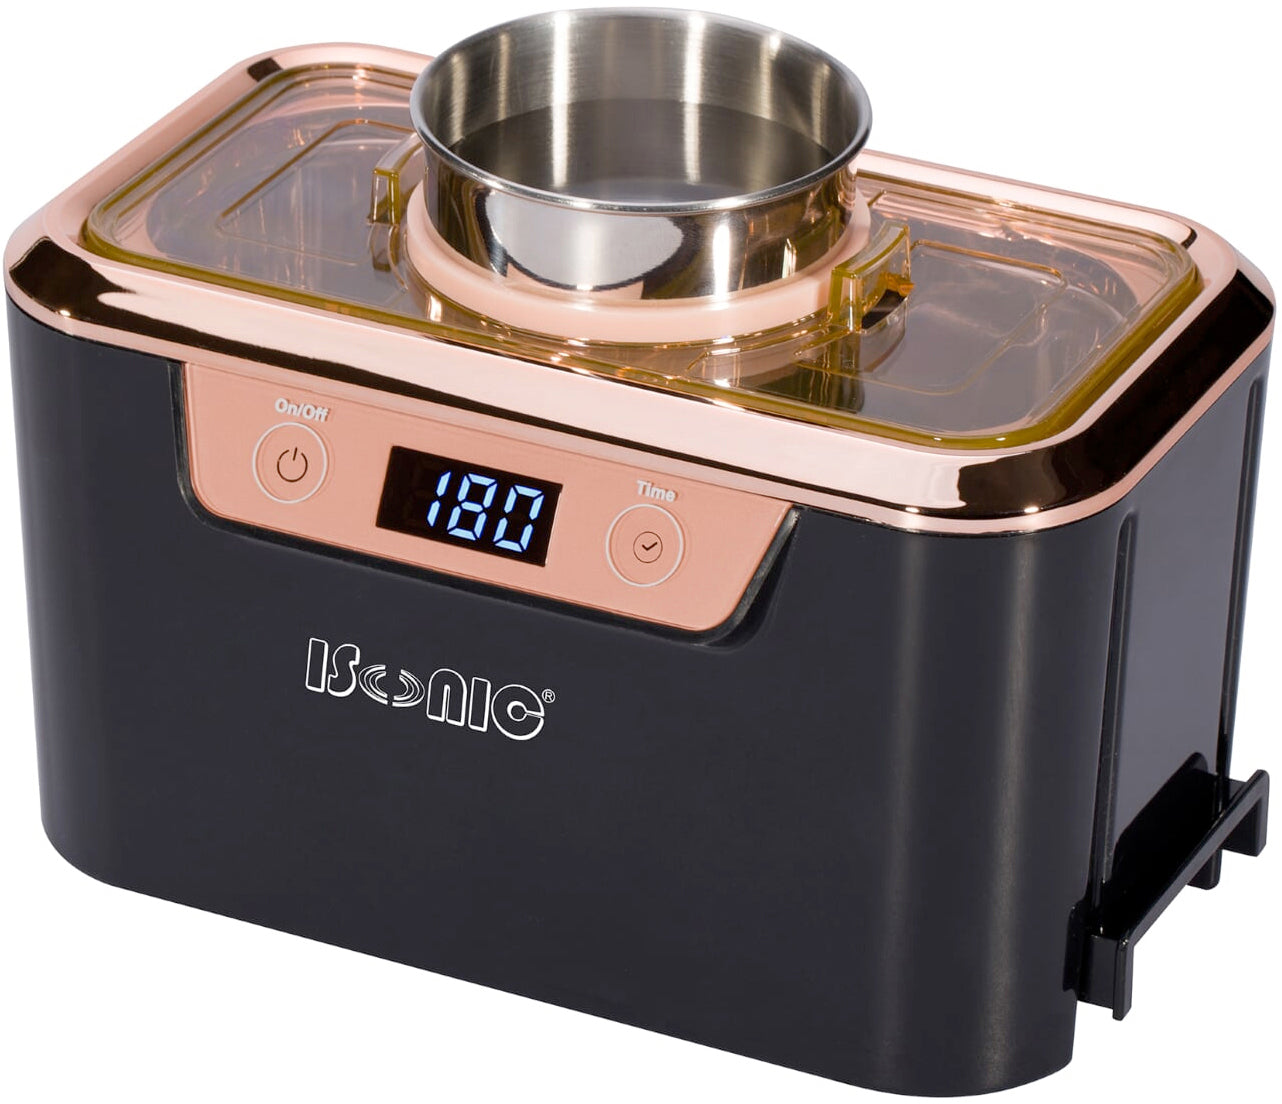 DS310-BR | iSonic® Miniaturized Commercial Ultrasonic Cleaner, black and rose gold colors, with integrated ss. beaker